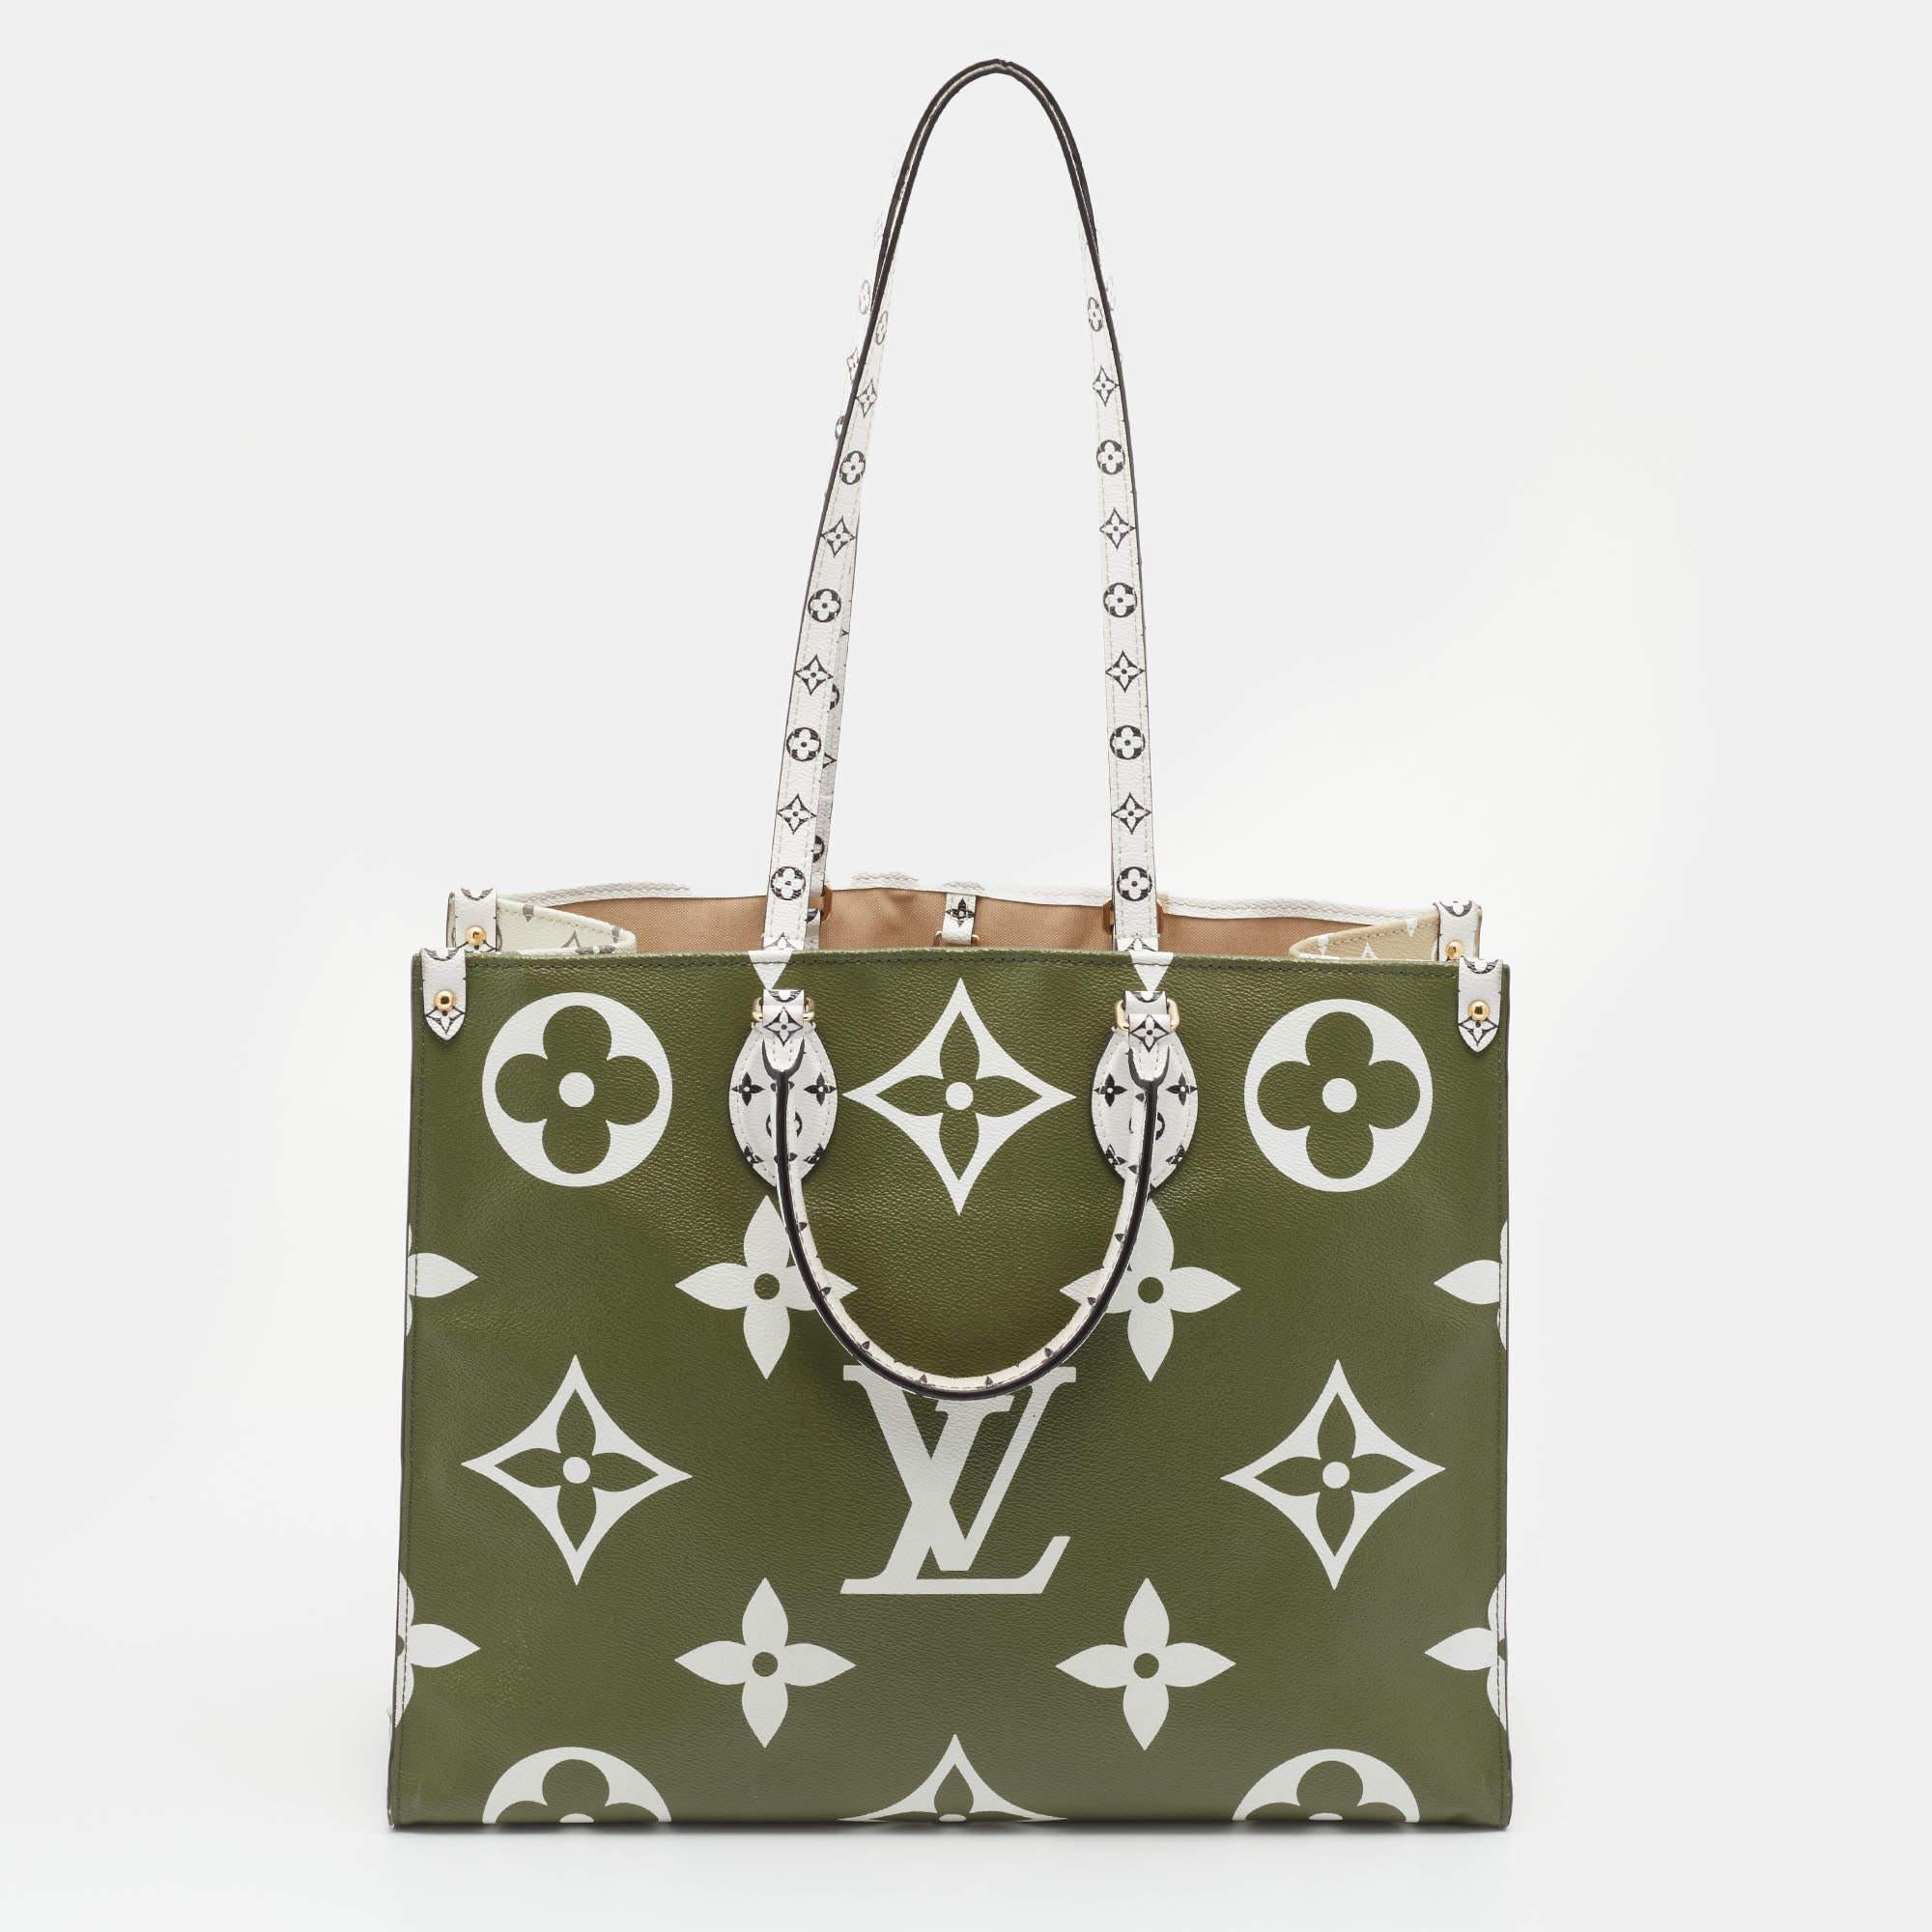 This LV Onthego GM bag easily delivers on the sophisticated charm of Louis Vuitton. This creation has been beautifully crafted from Monogram Giant canvas and sized to hold your day's essentials. The top handles and shoulder straps provide different